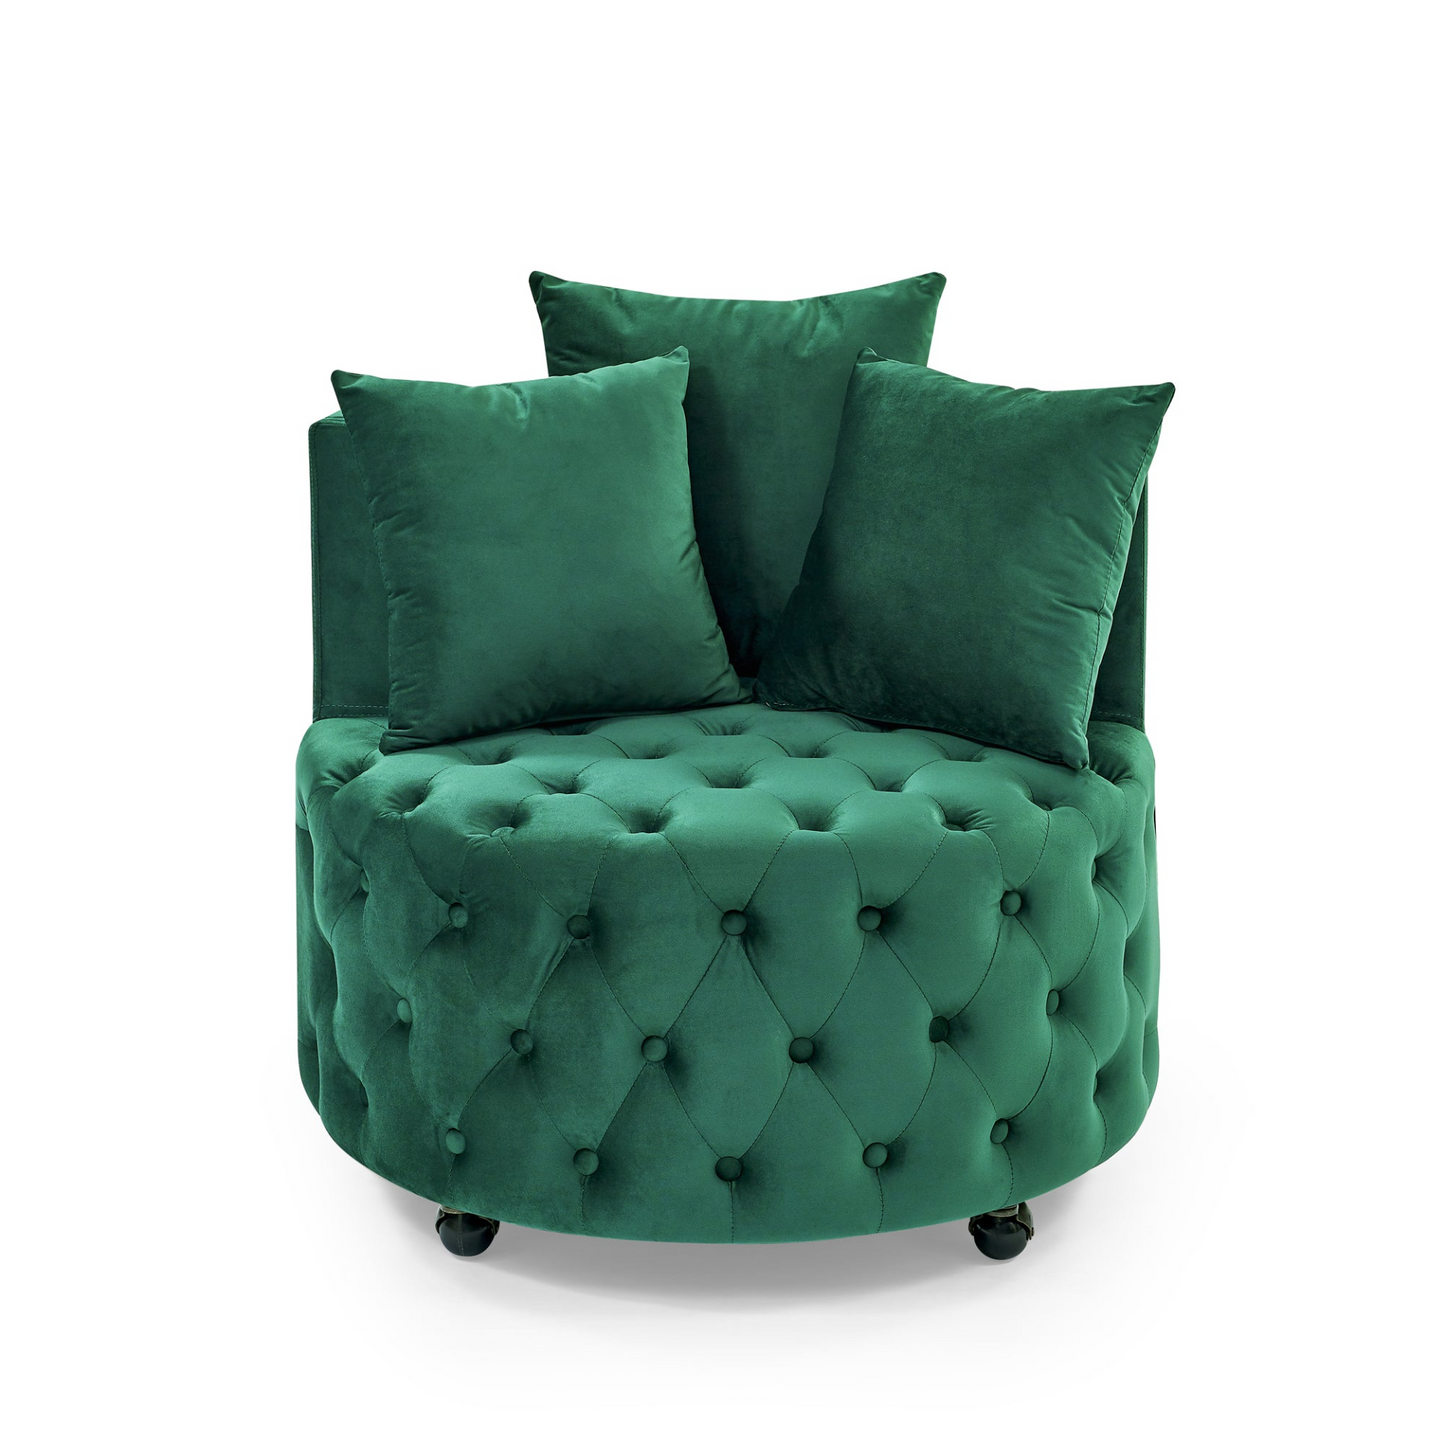 Velvet Upholstered Swivel Chair w/Button Tufted Design and Movable Wheels, Including 3 Pillows, Green